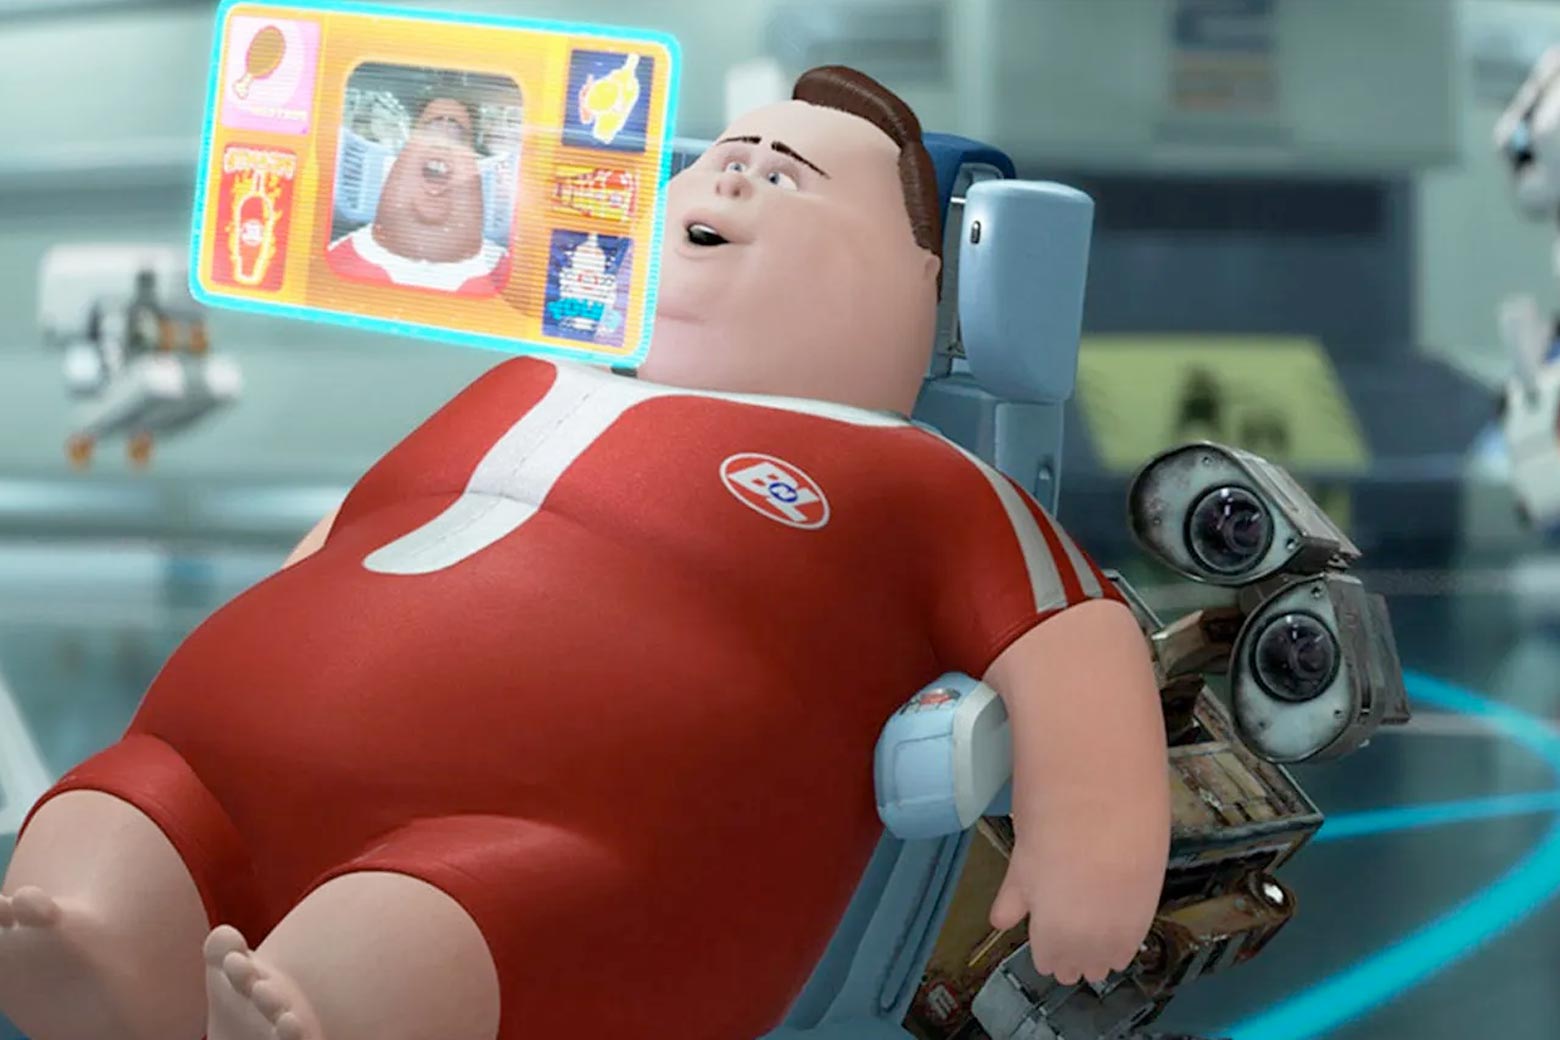 An overweight human character sits in a chair looking at a hovering screen in front of his face while WALL-E sneaks around behind him.